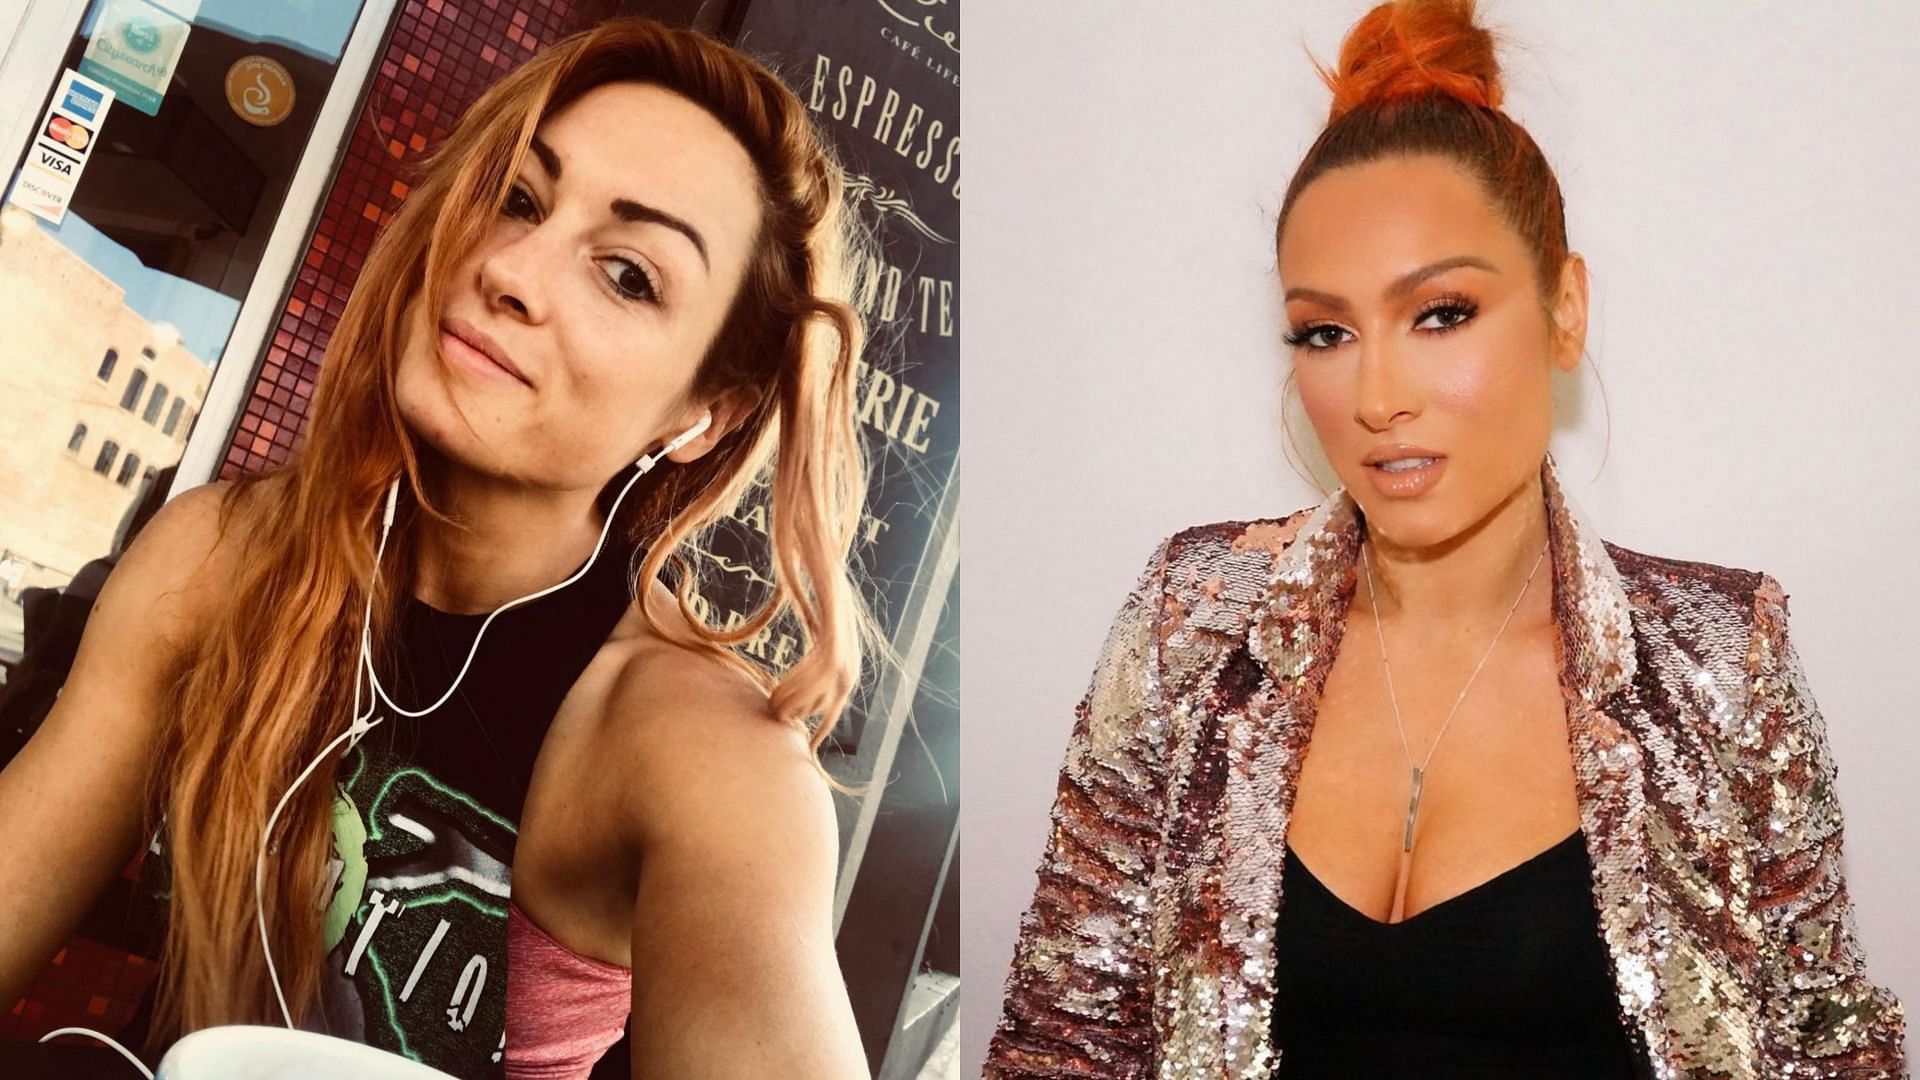 Becky Lynch without makeup (left) and with makeup (right)